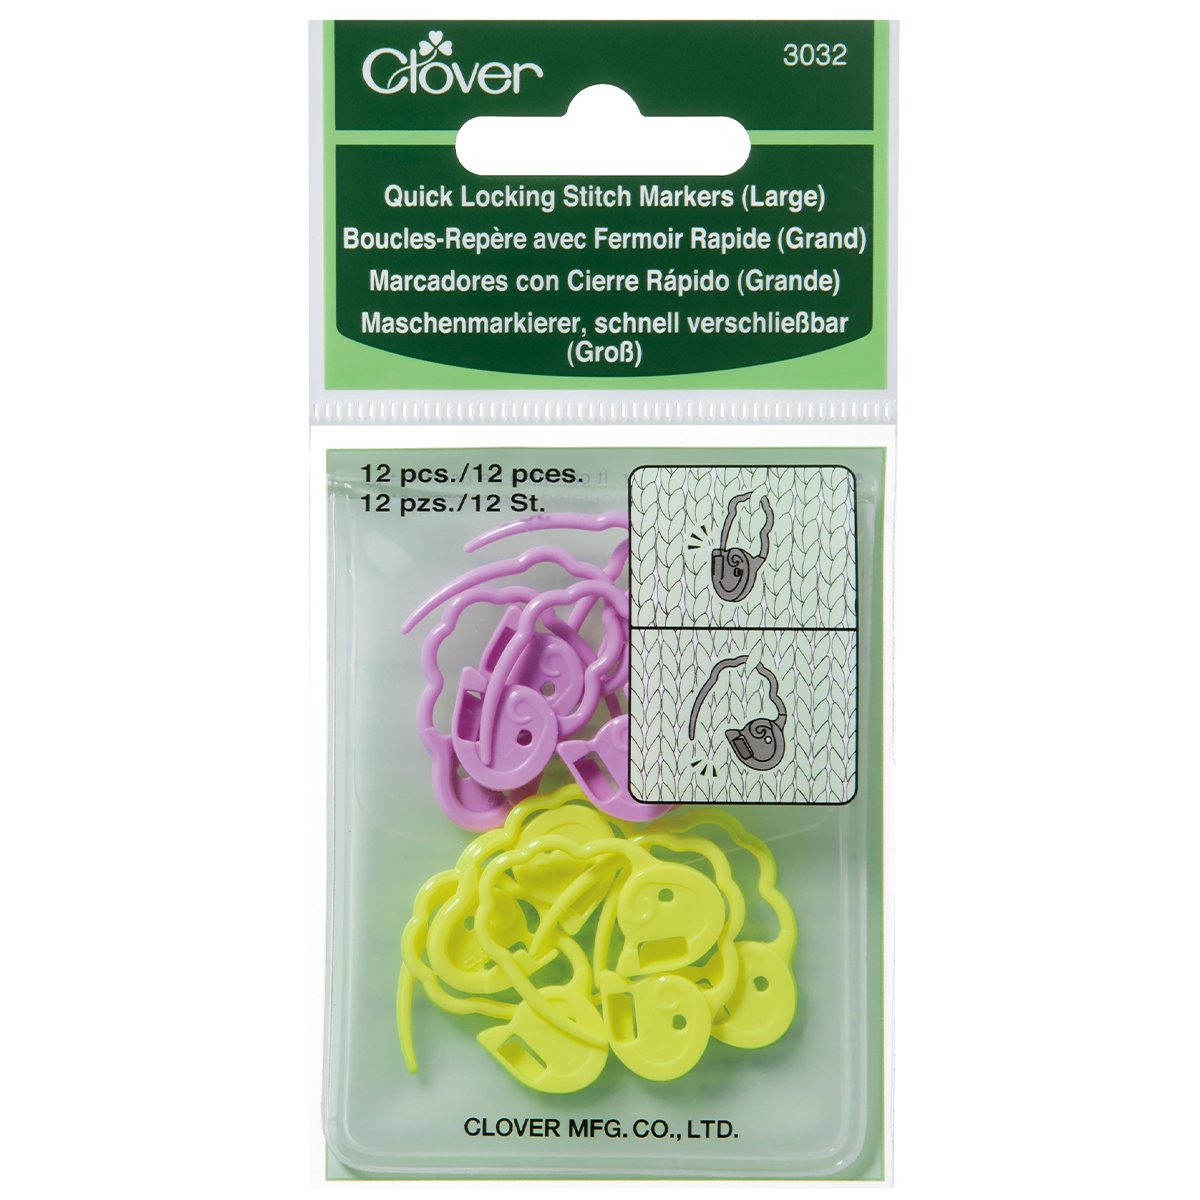 Clover Locking Stitch Markers With Clip